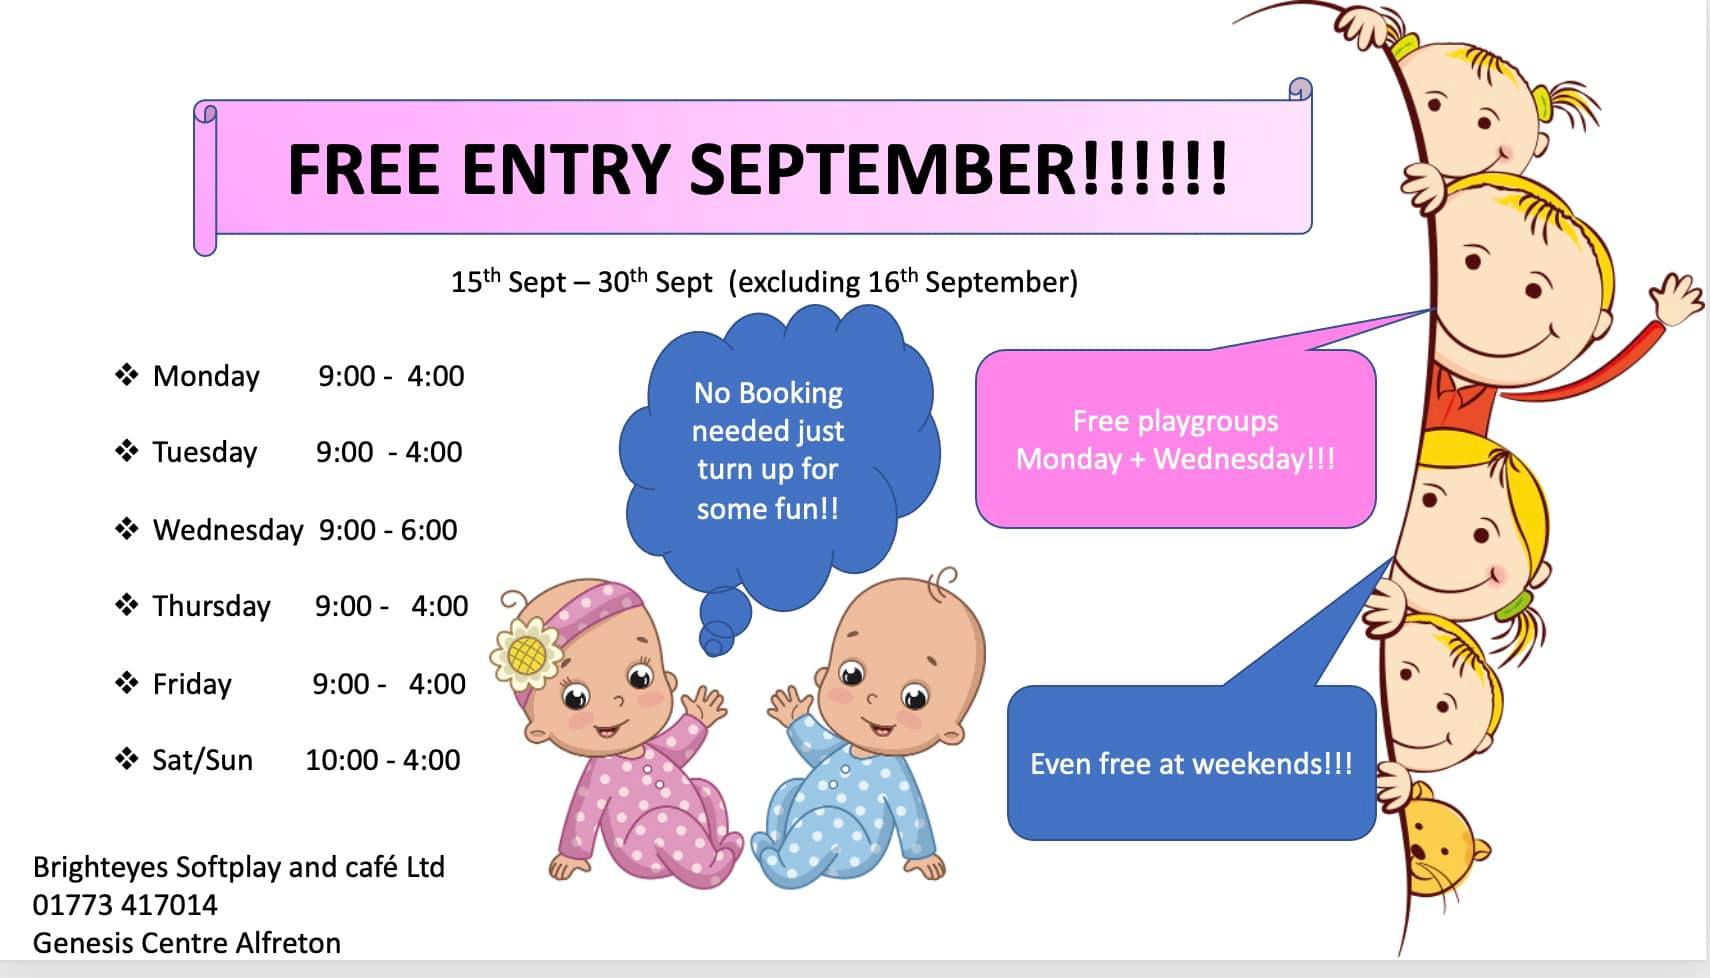 Children of all ages can play for free at Brighteyes Softplay for the rest of September